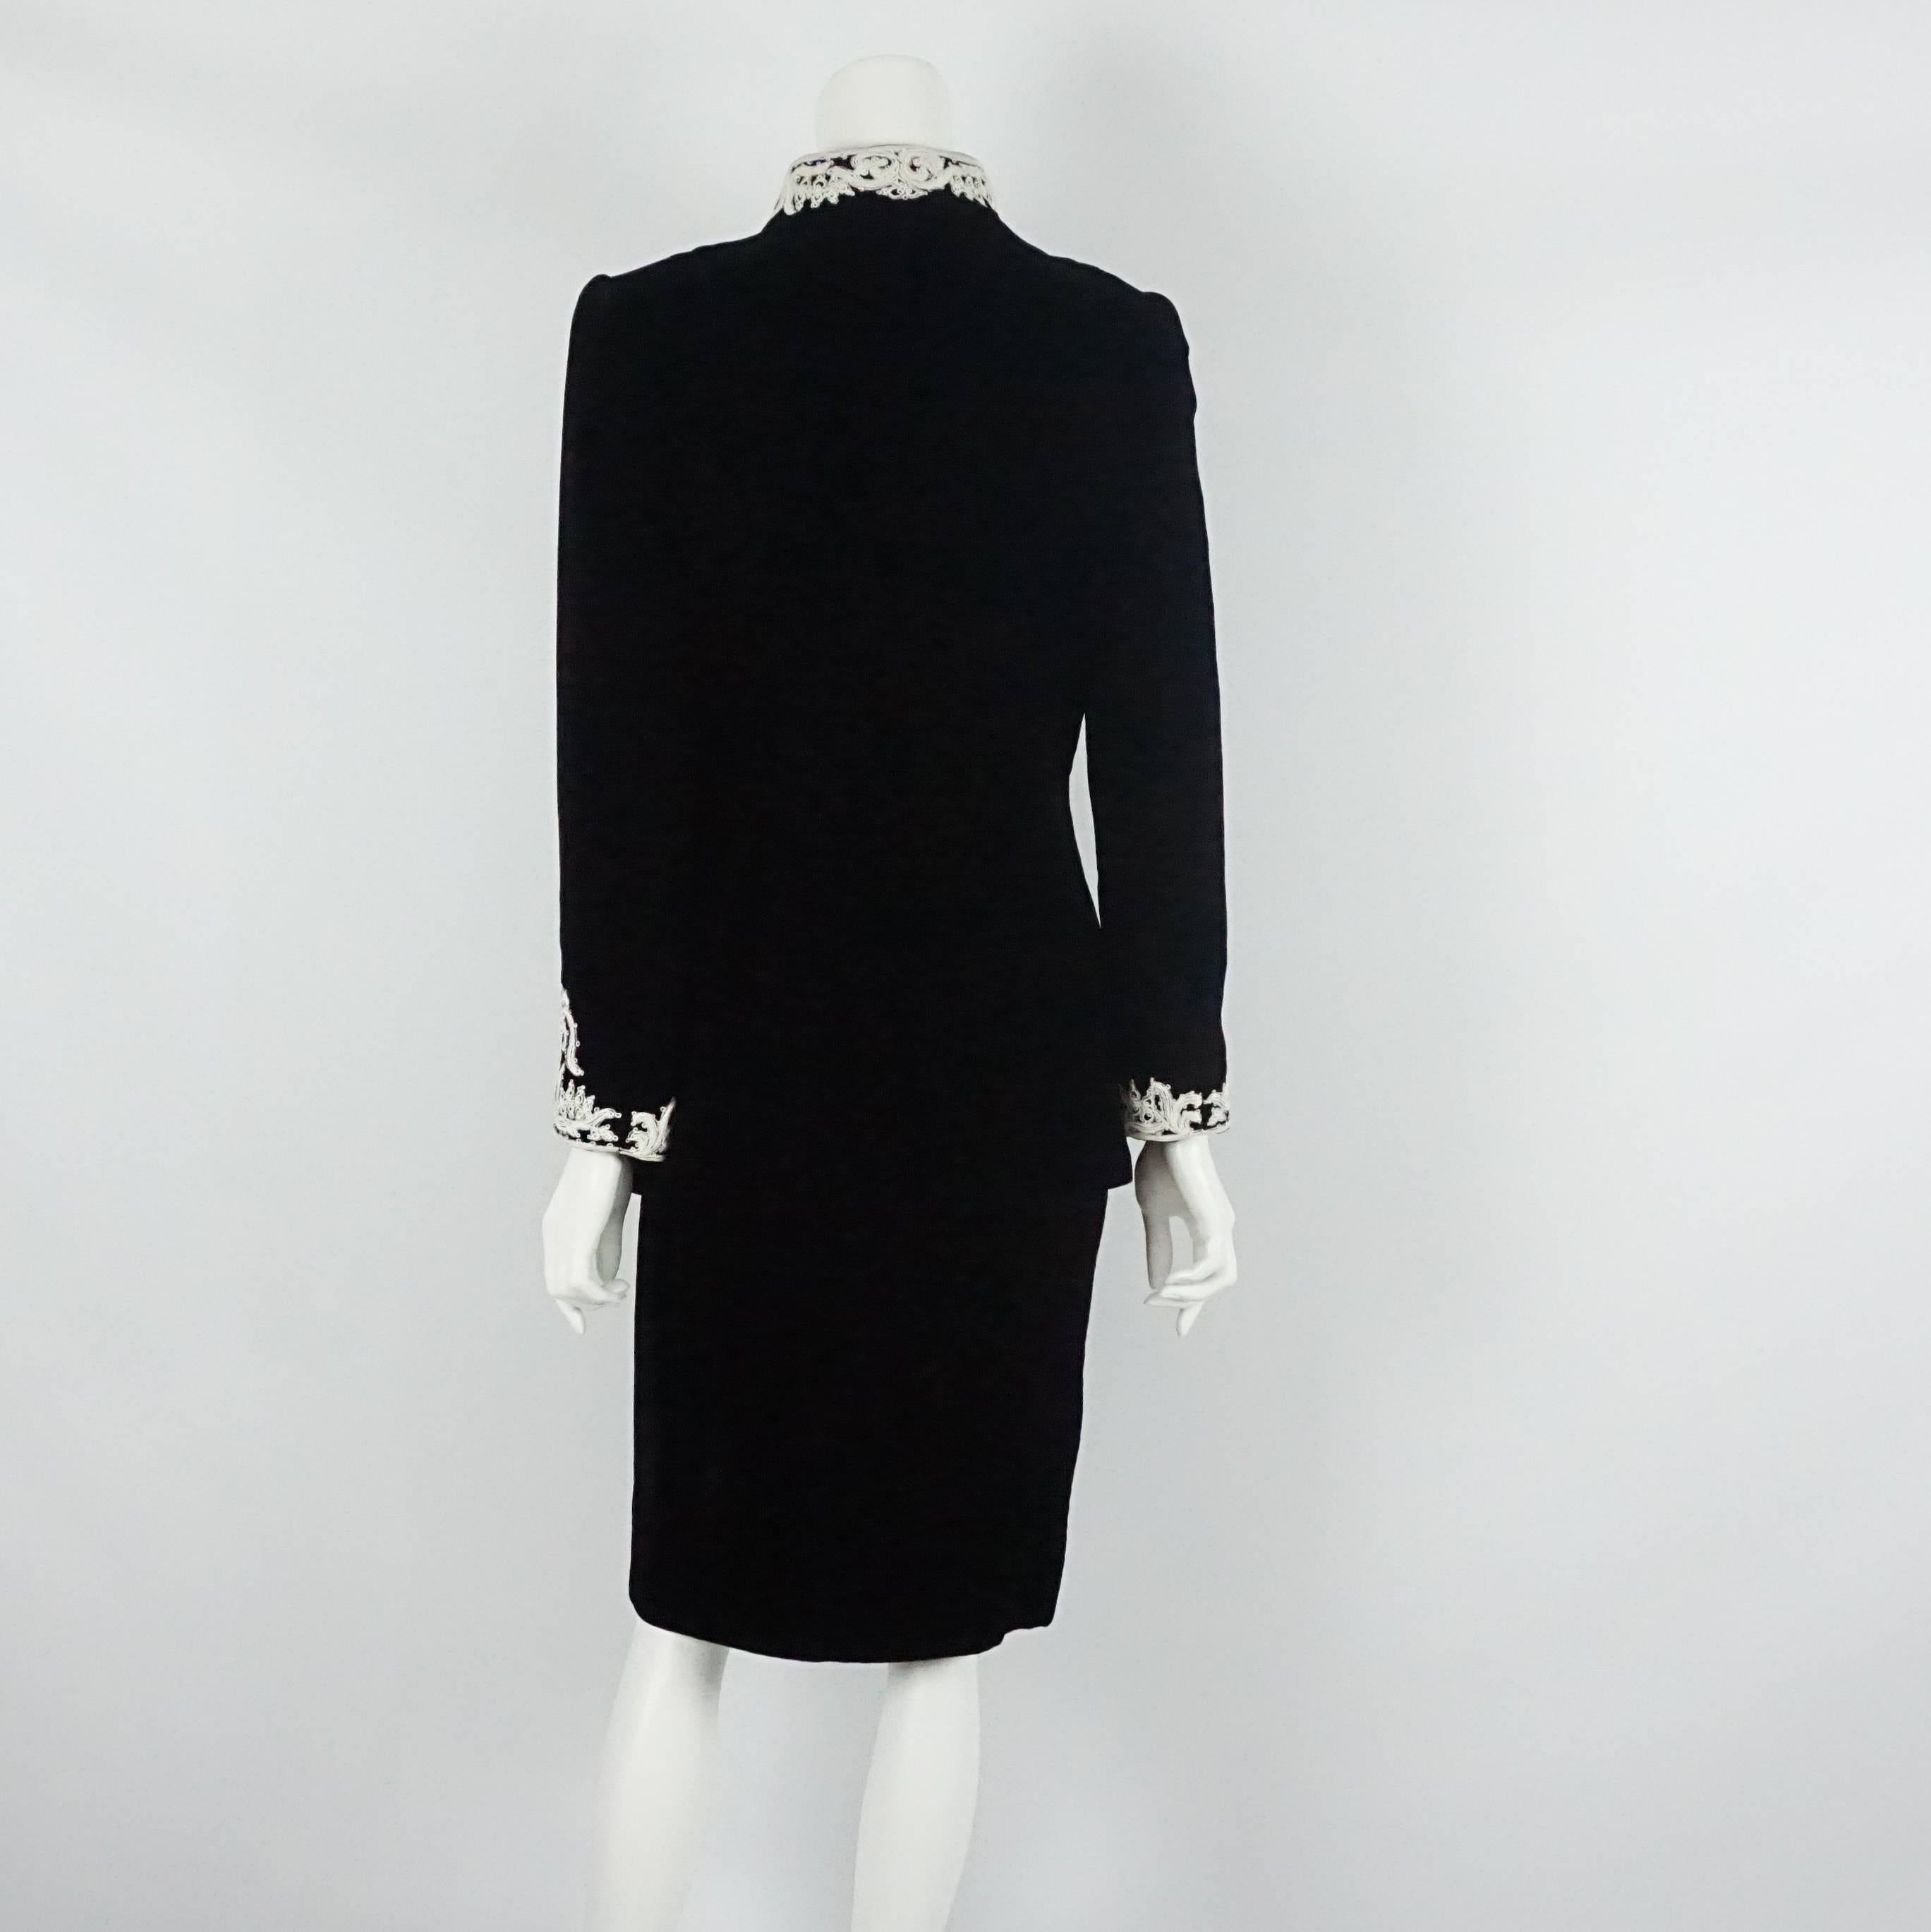 Oscar de la Renta Black Velvet Skirt Suit with White Embroidery - 10 - 1990s In Excellent Condition For Sale In West Palm Beach, FL